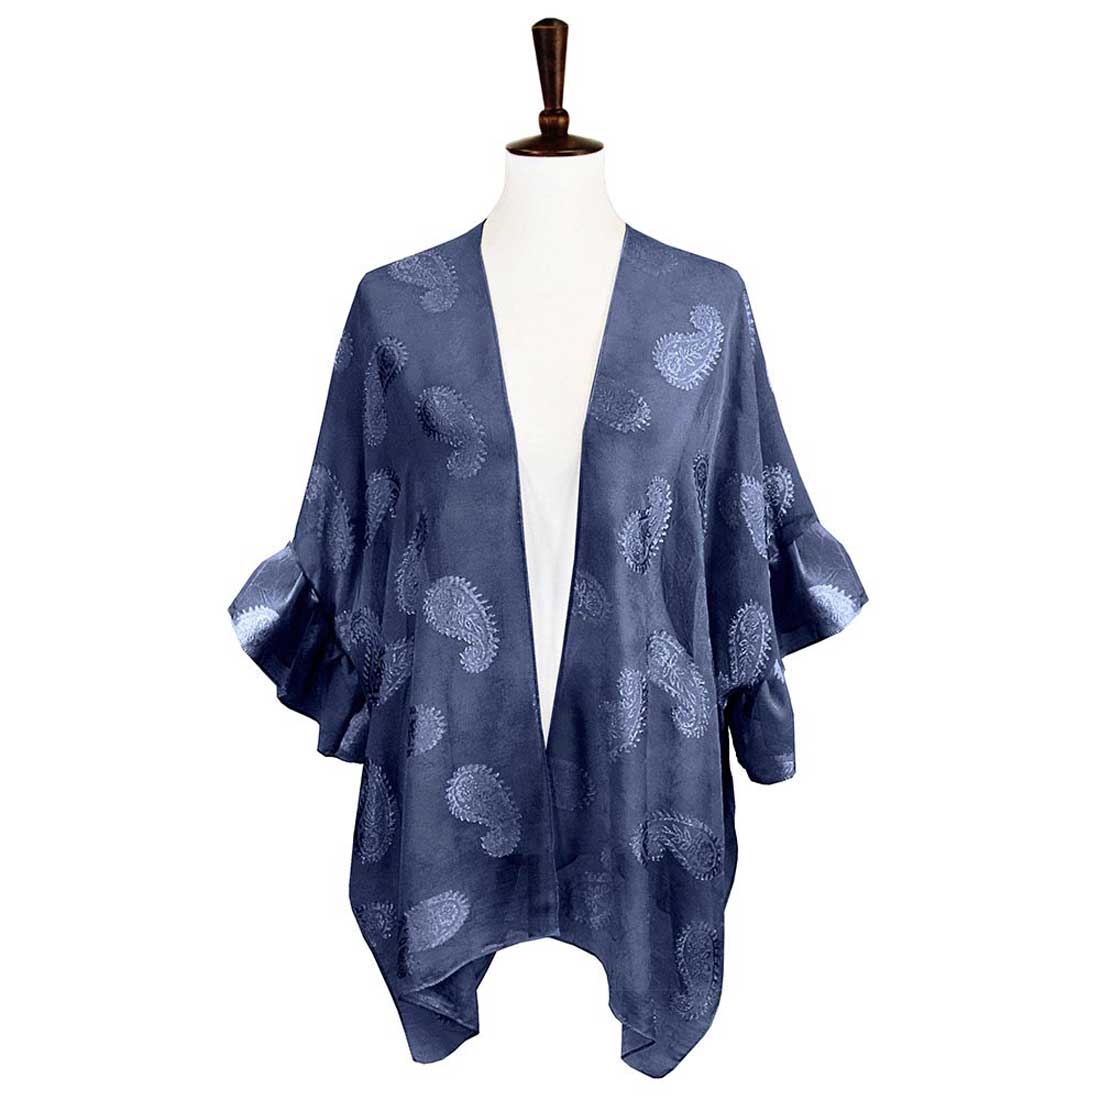 Navy Paisley Patterned Sheer Ruffle Sleeves Cover Up Kimono Poncho, The lightweight Kimono poncho top is made of soft and breathable Polyester material. short sleeve swimsuit cover up with open front design, simple basic style, easy to put on and down. Perfect Gift for Wife, Mom, Birthday, Holiday, Anniversary, Fun Night O